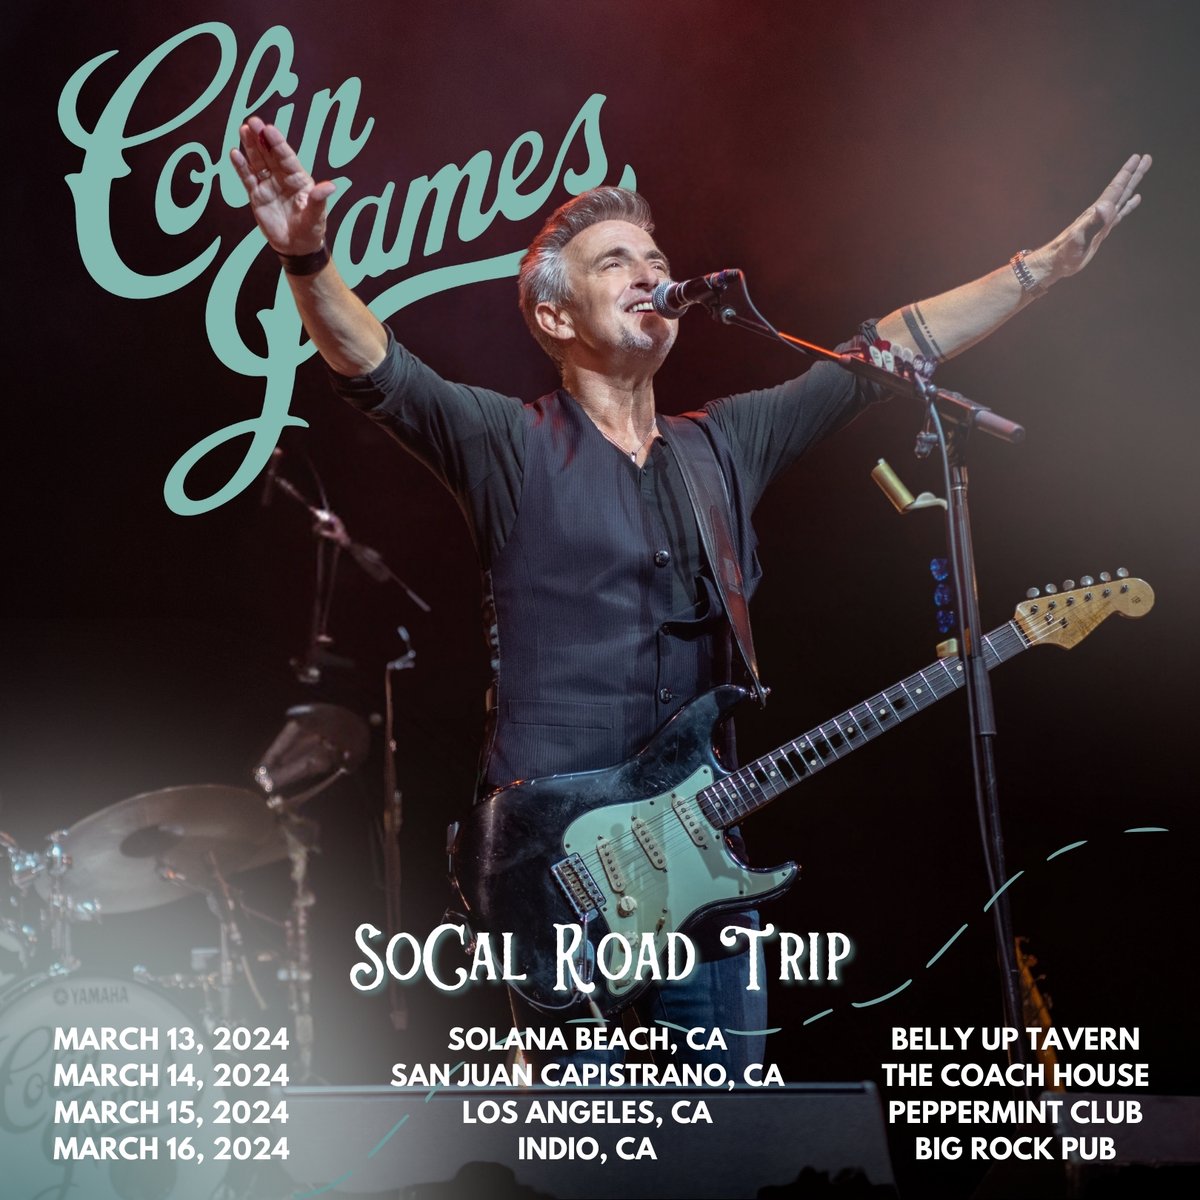 JUST ANNOUNCED: We've added Solana Beach, CA to my SoCal Road Trip this March at the awesome Belly Up Tavern. Really looking forward to being back there. See you in March! Tickets for all SoCal dates are on sale now! 🎟: colinjames.com/tour @BellyUpMusic #colinjames